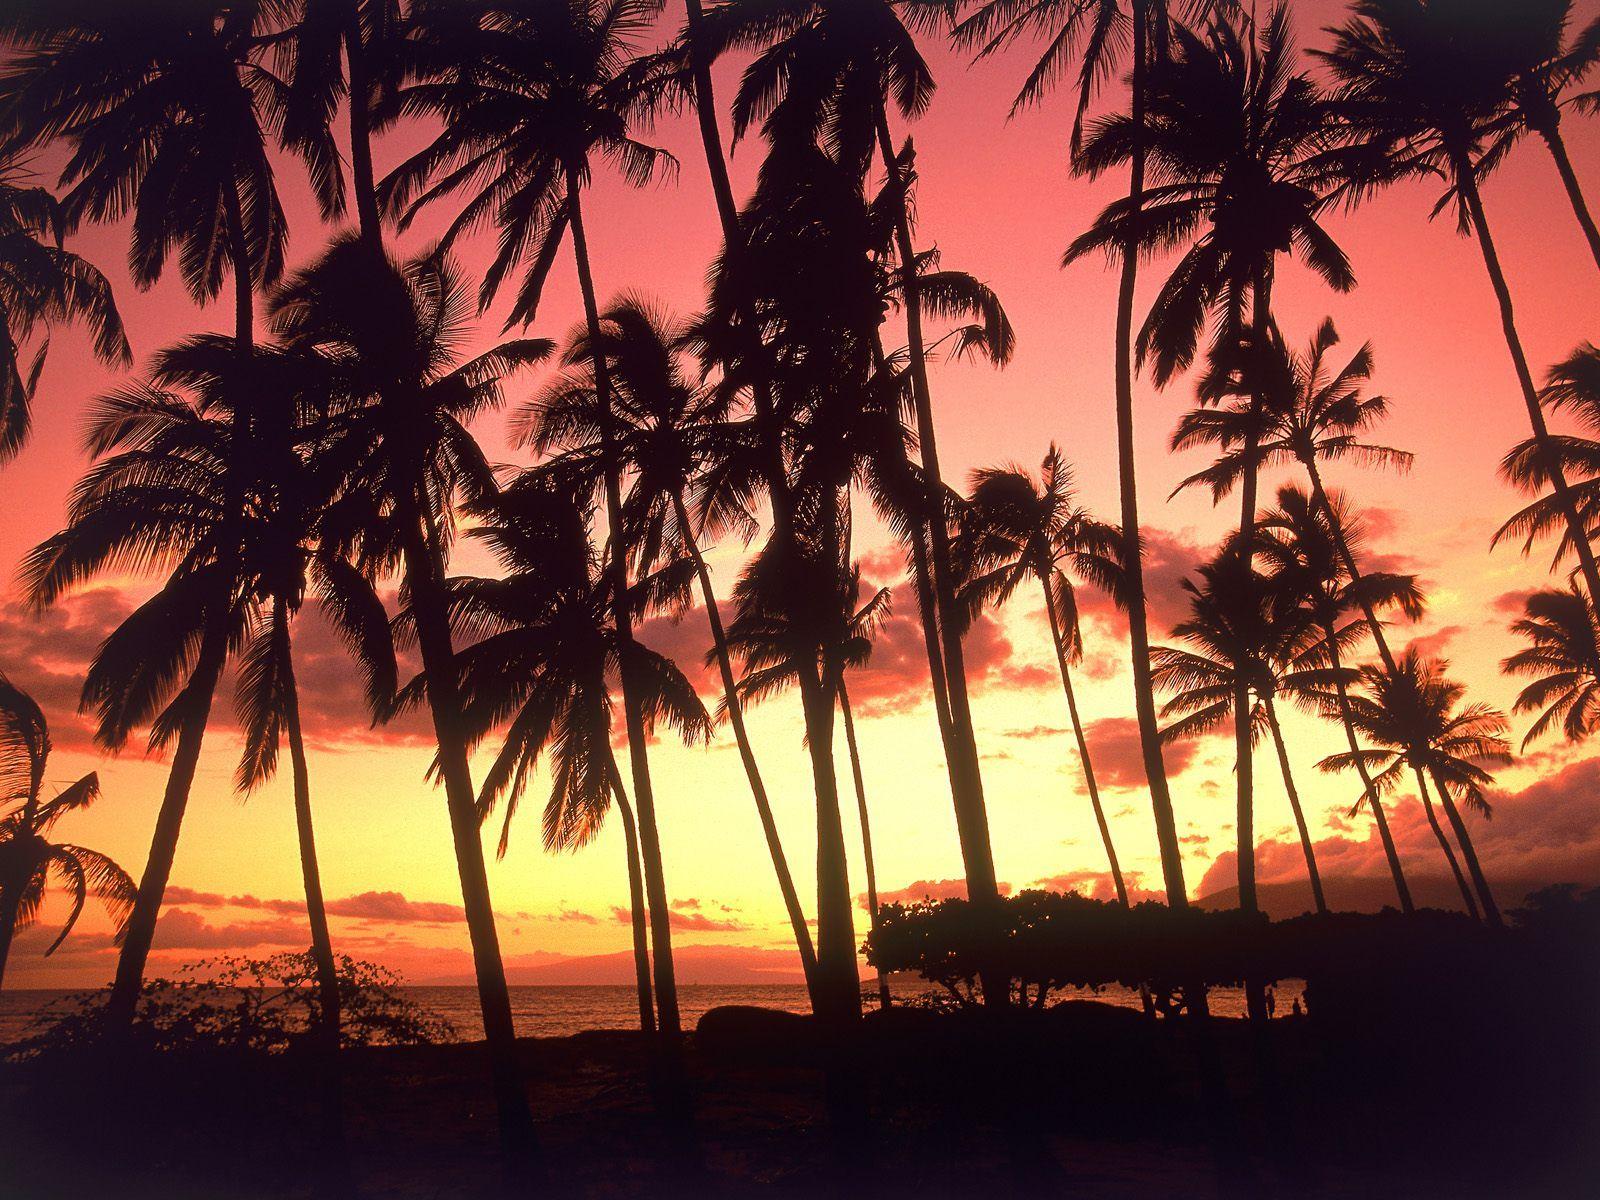 Hawaiian sunset I hope to see!!!. For the Home